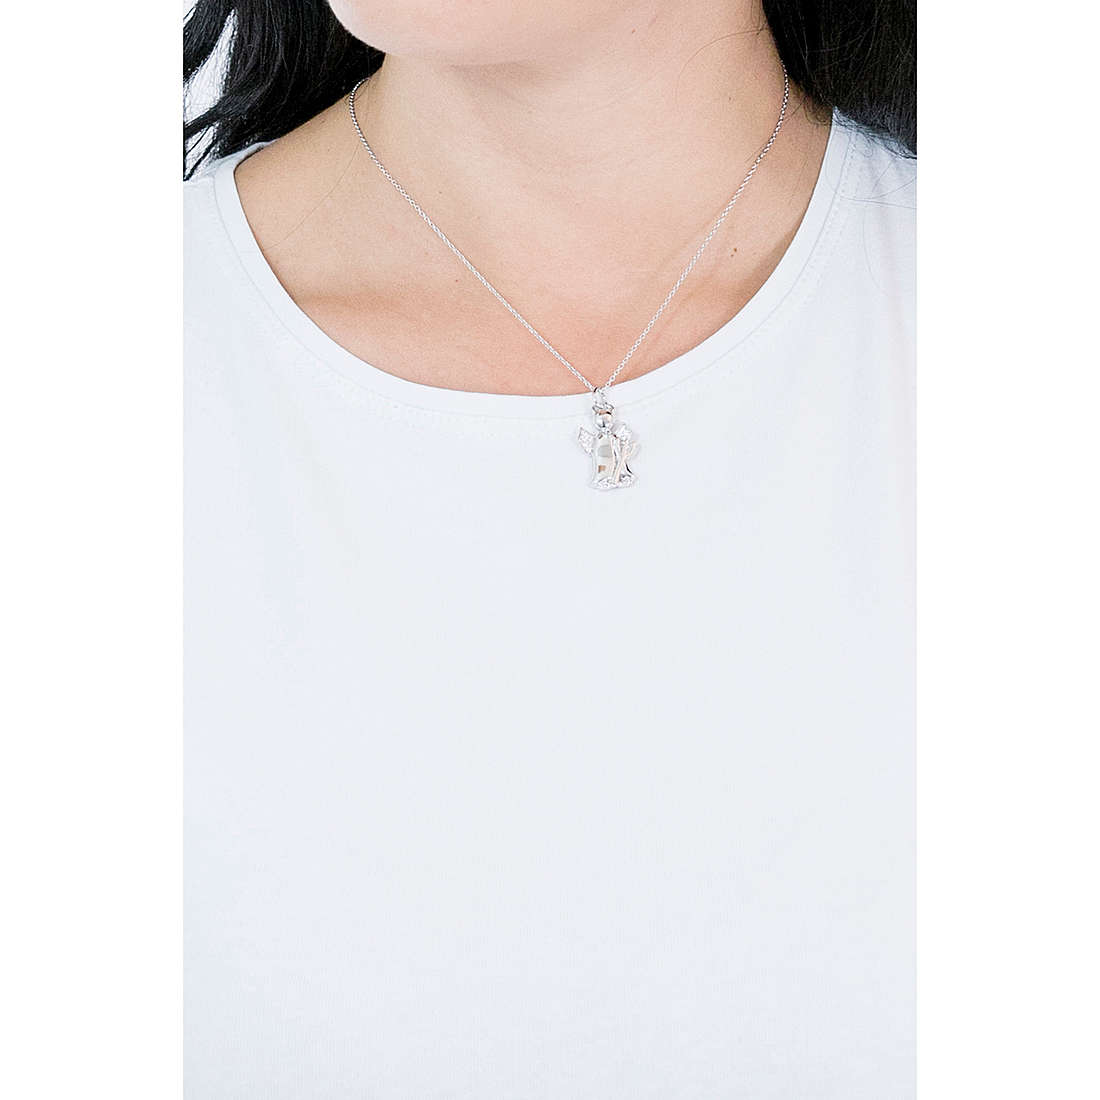 Amen necklaces Naughty&Nice woman D4BBB wearing